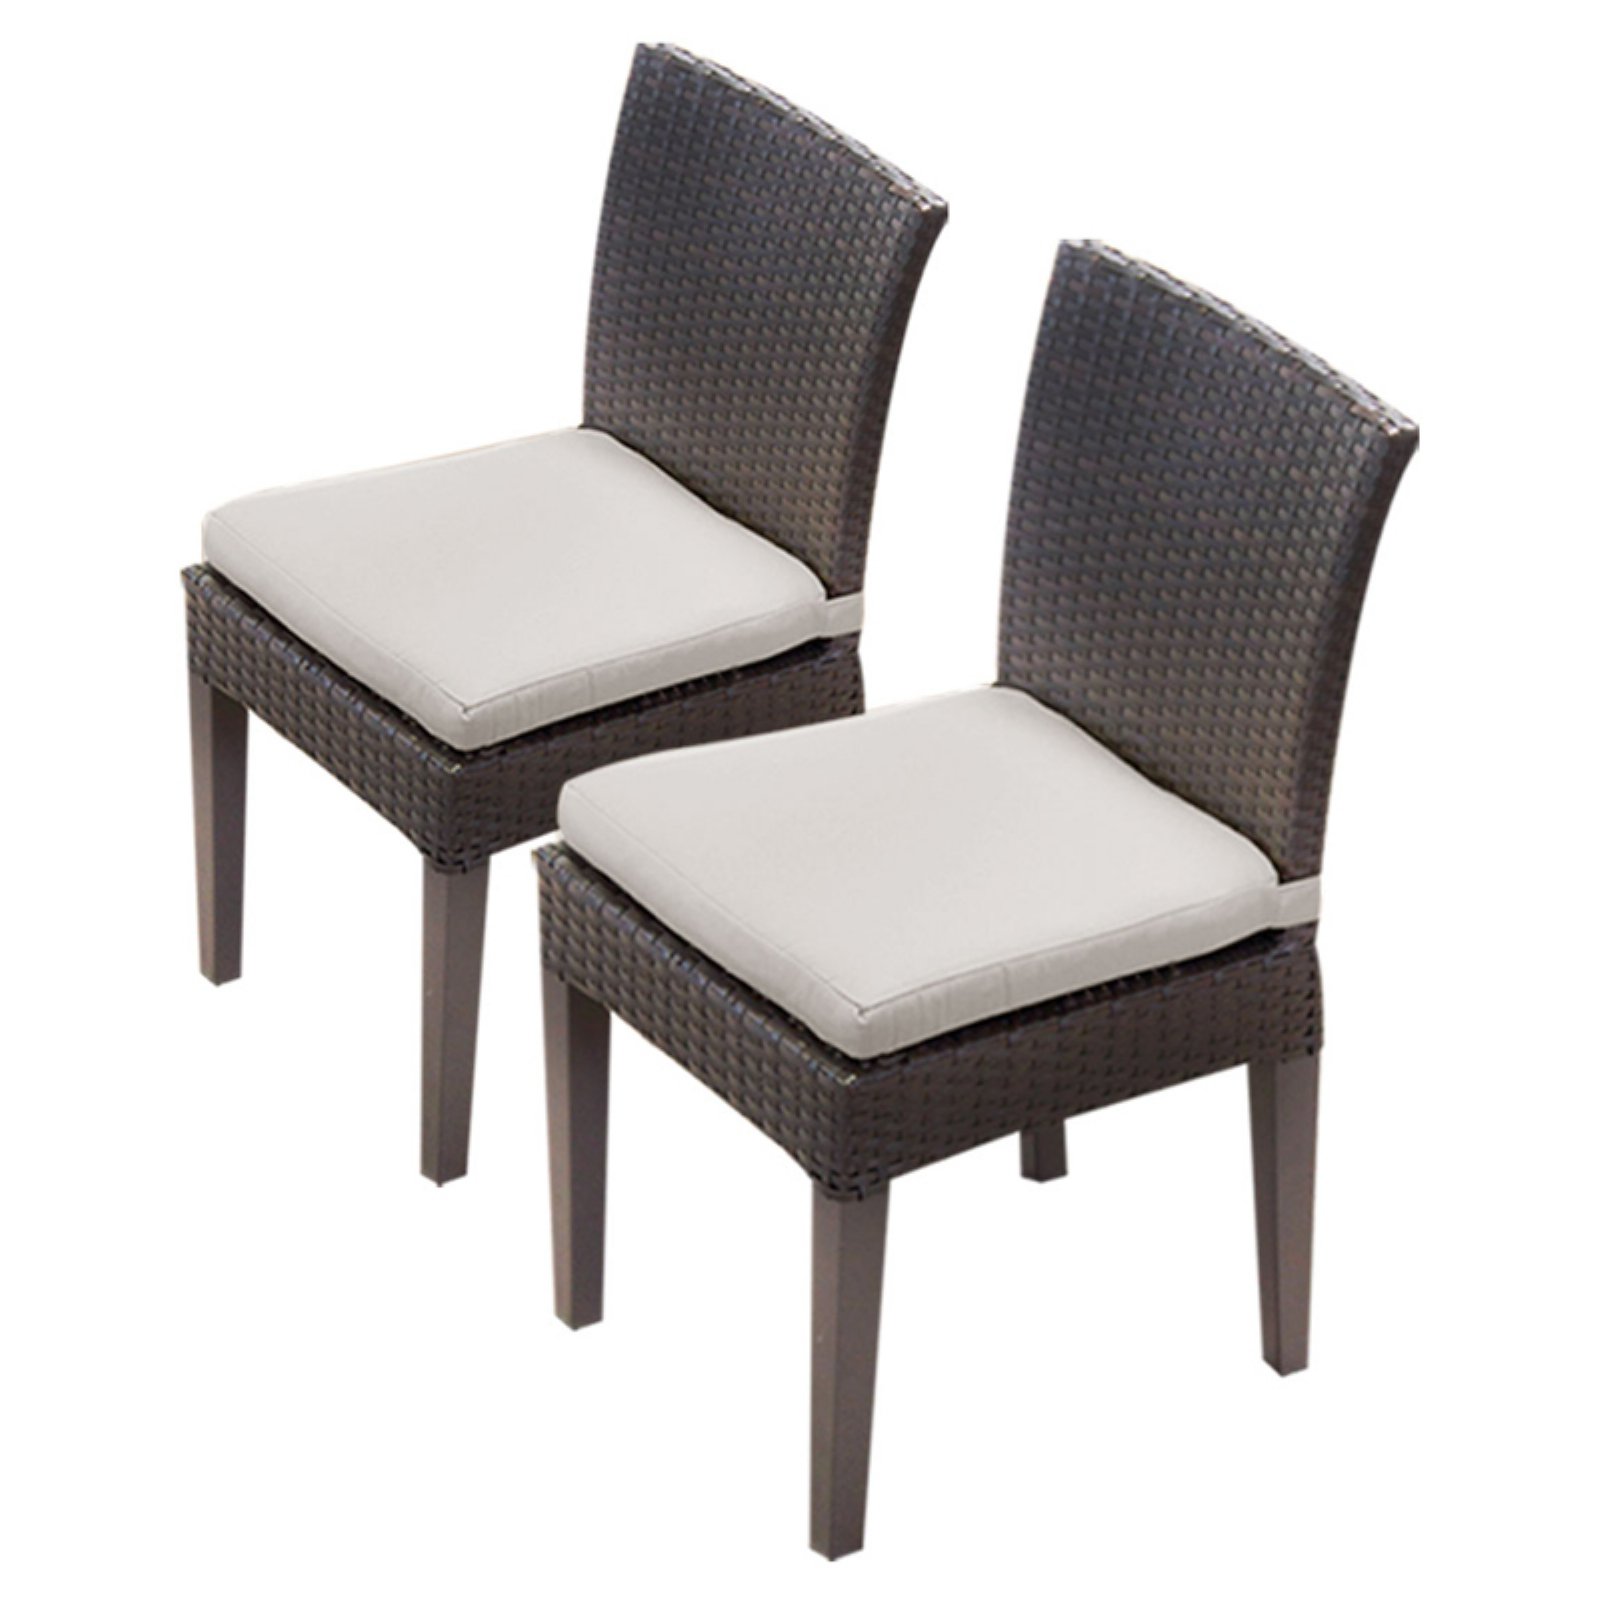 TK Classics Napa Outdoor Dining Side Chair with 2 Cushion Covers - image 2 of 2